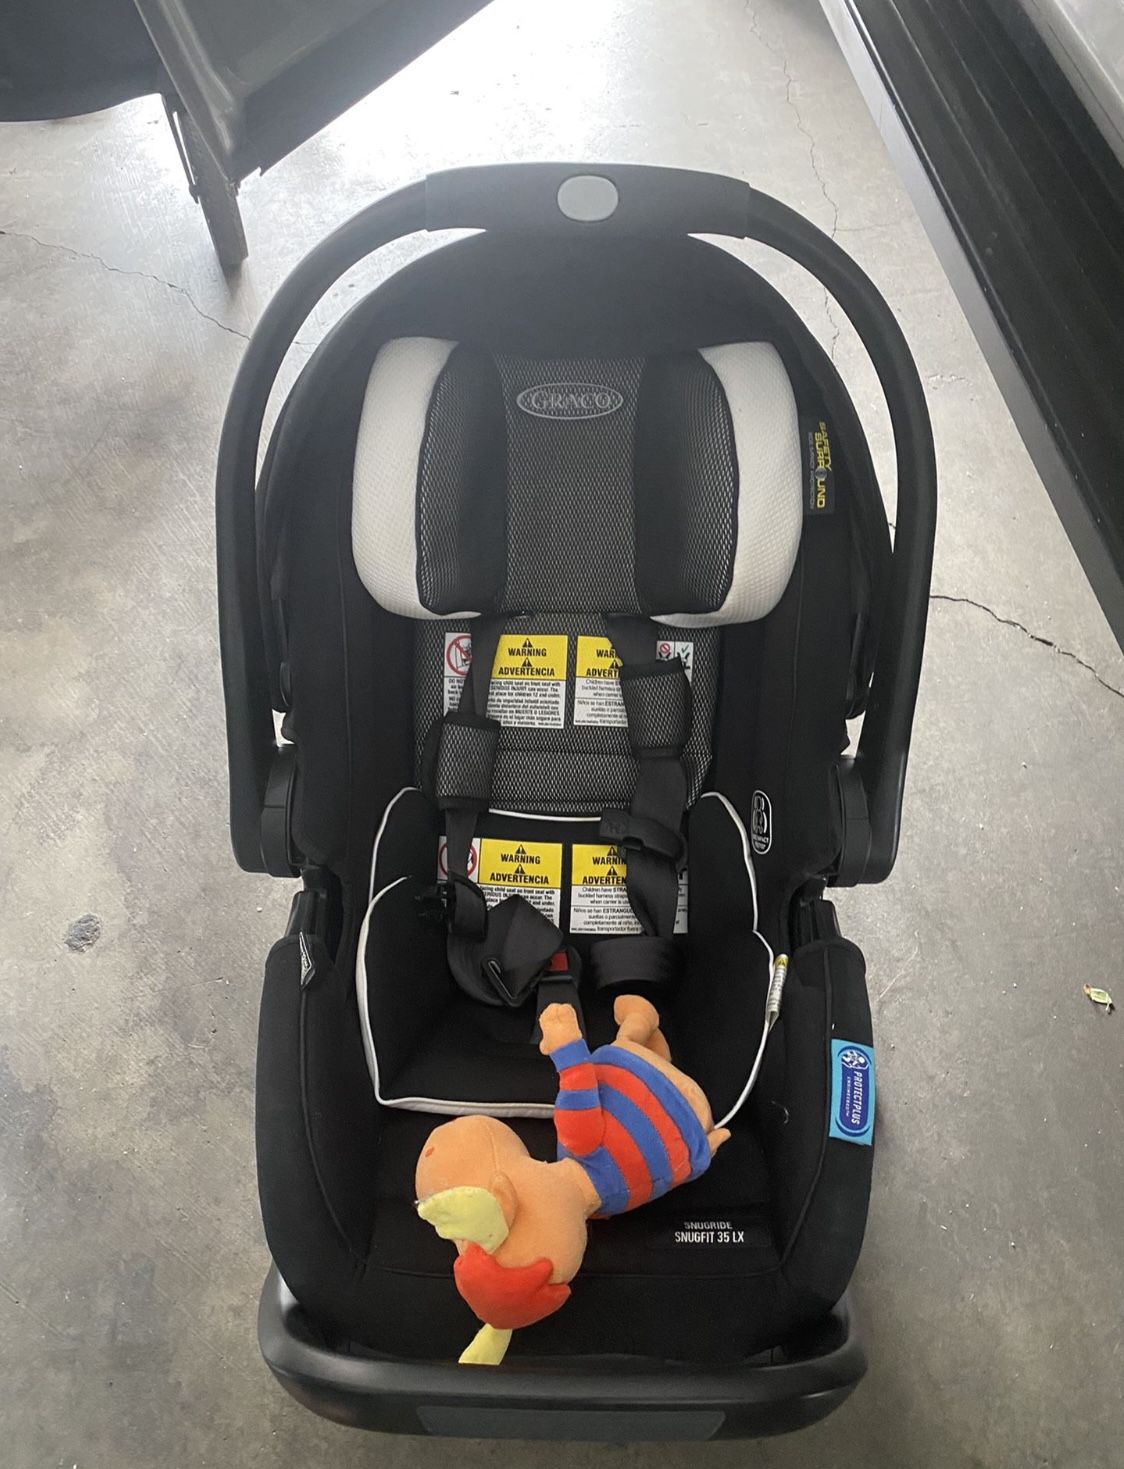 Greco Car Seat For Baby 